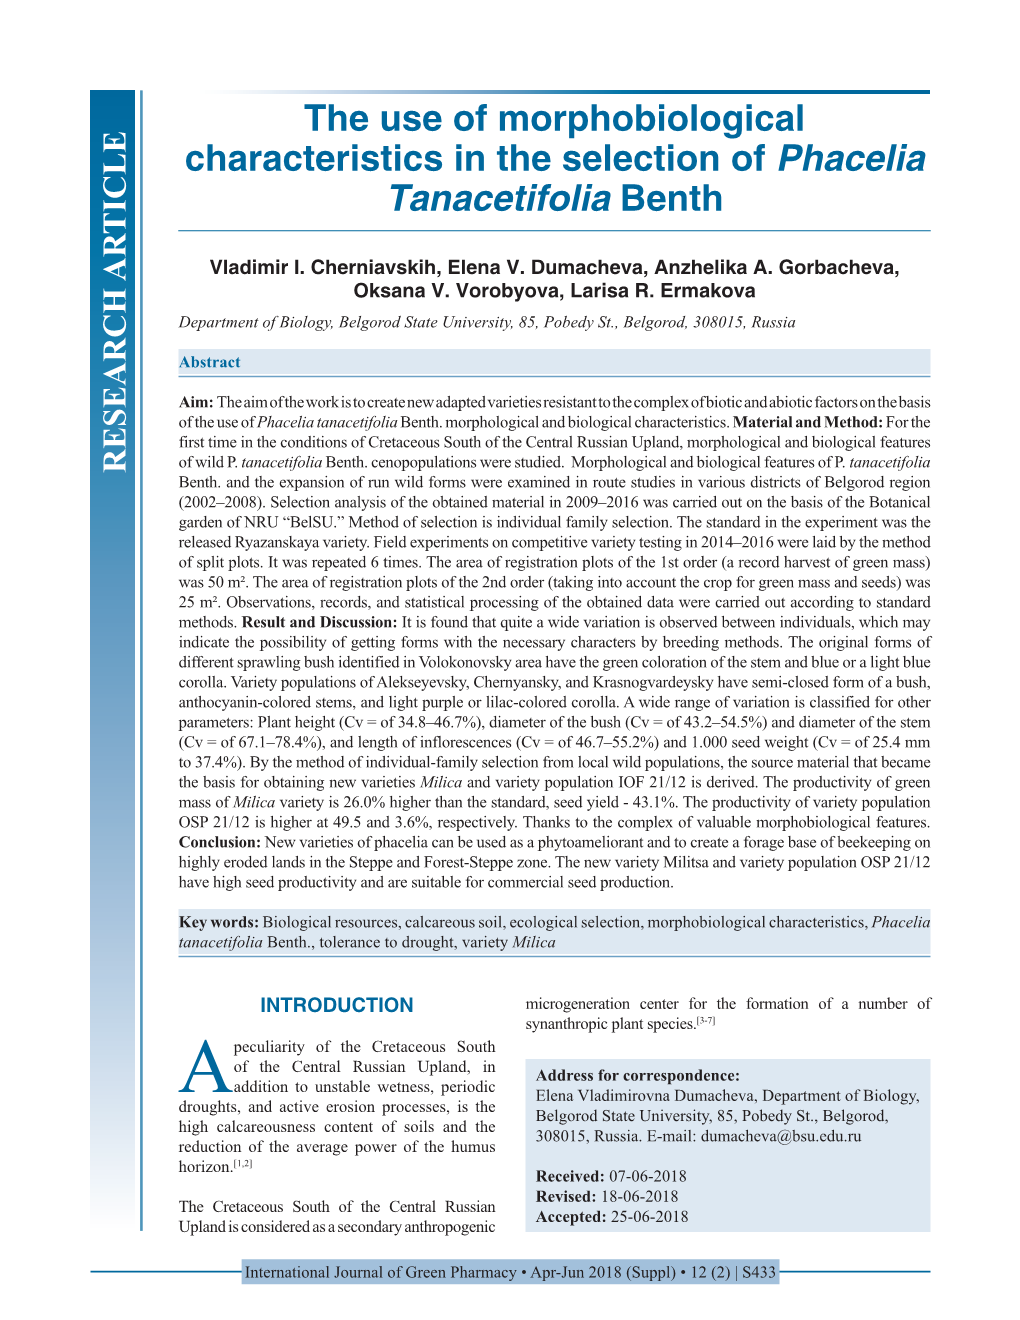 The Use of Morphobiological Characteristics in the Selection of Phacelia Tanacetifolia Benth